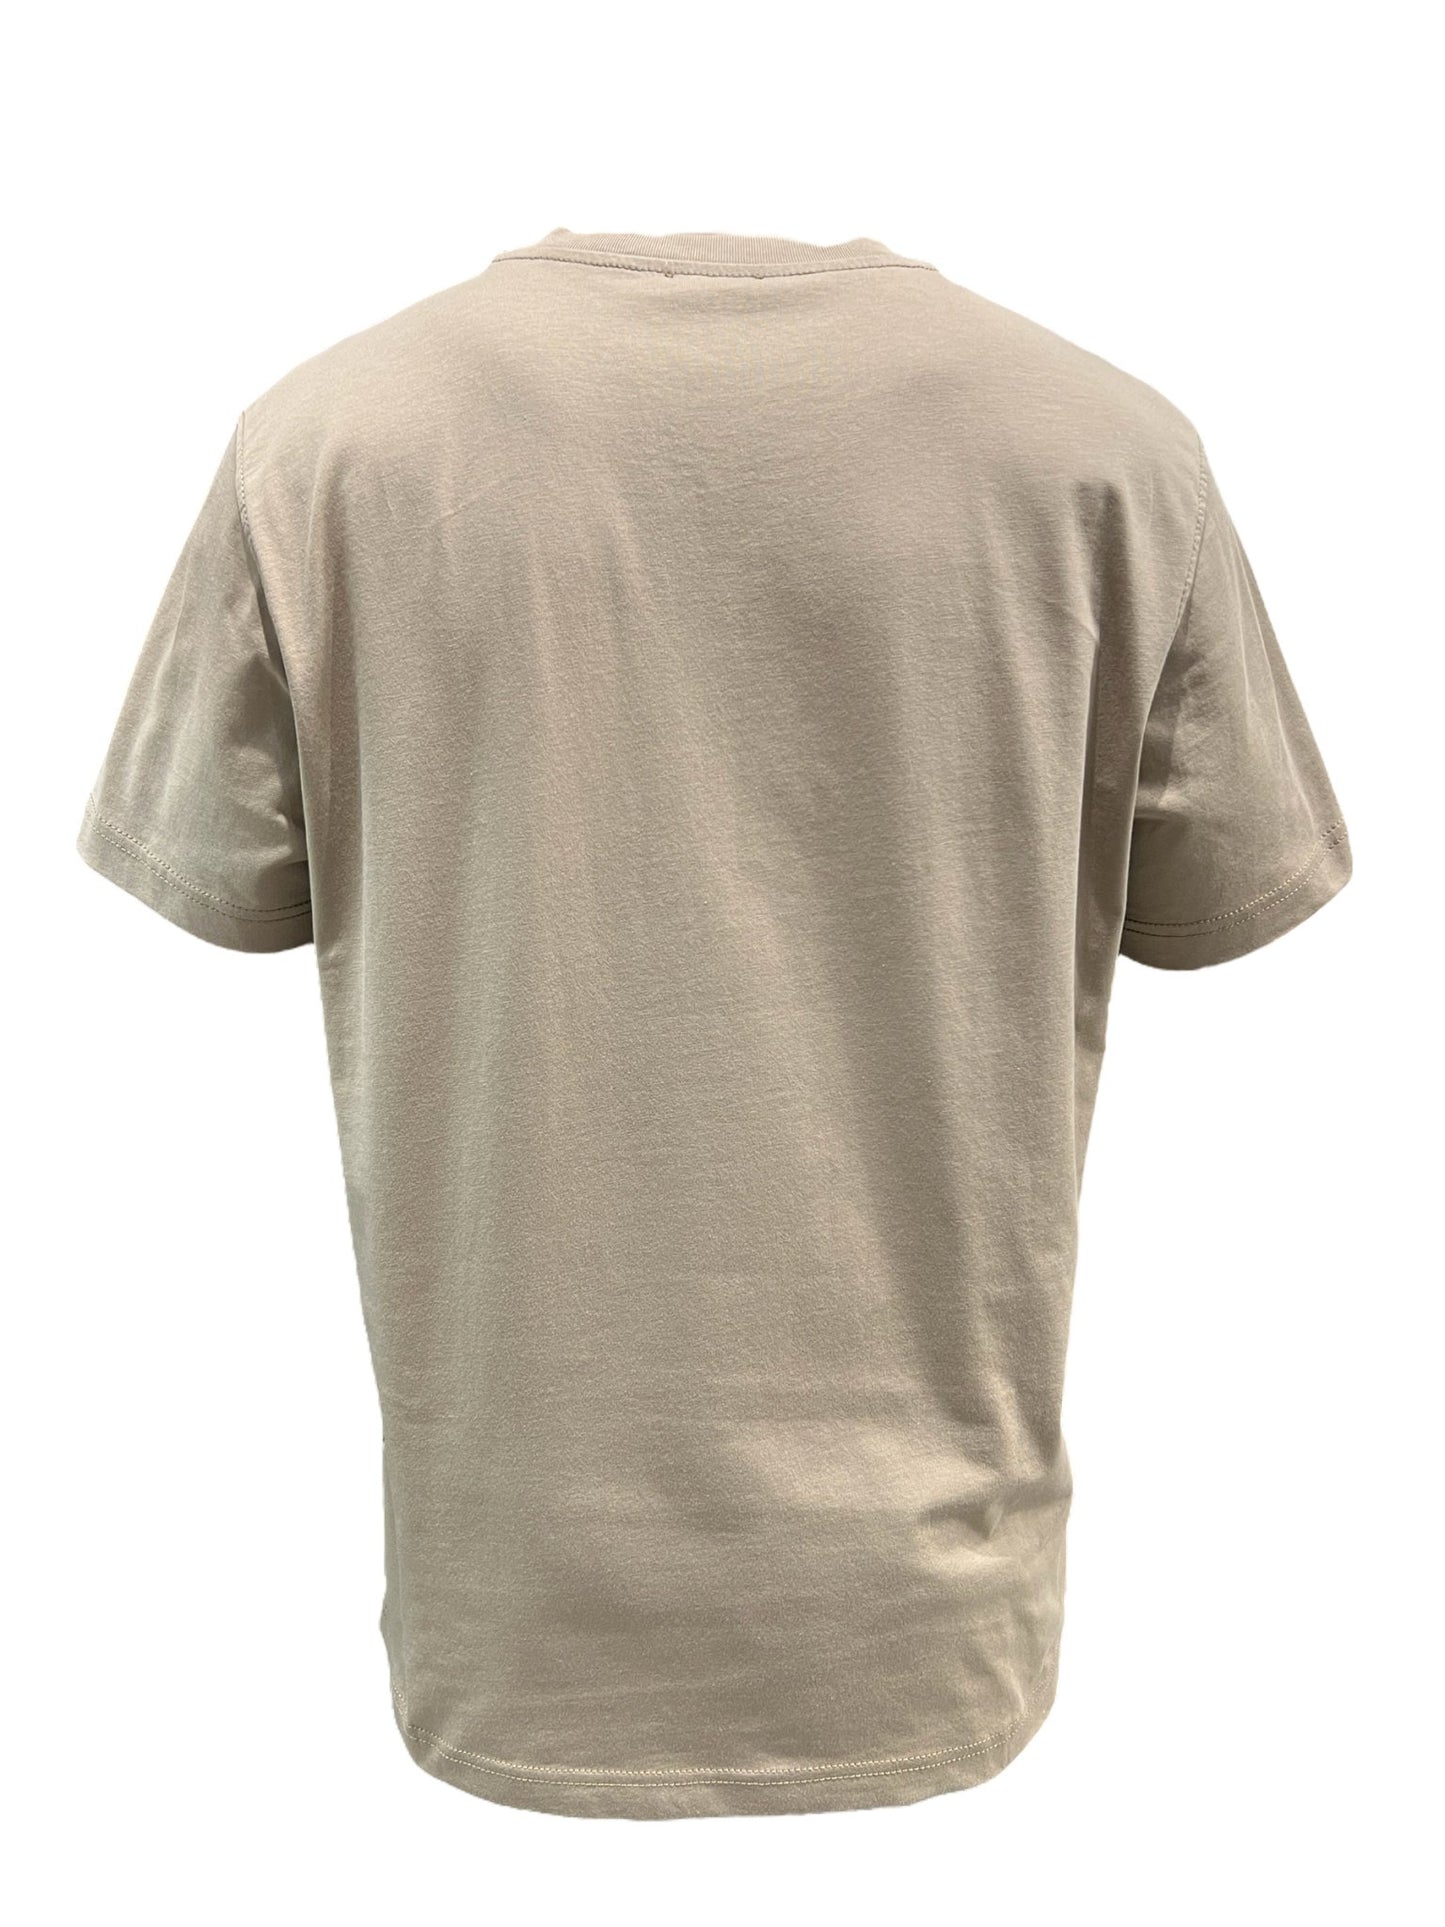 Plain beige DIESEL T-DIEGOR-K73 T-SHIRT BROWN displayed from the back on a white background.